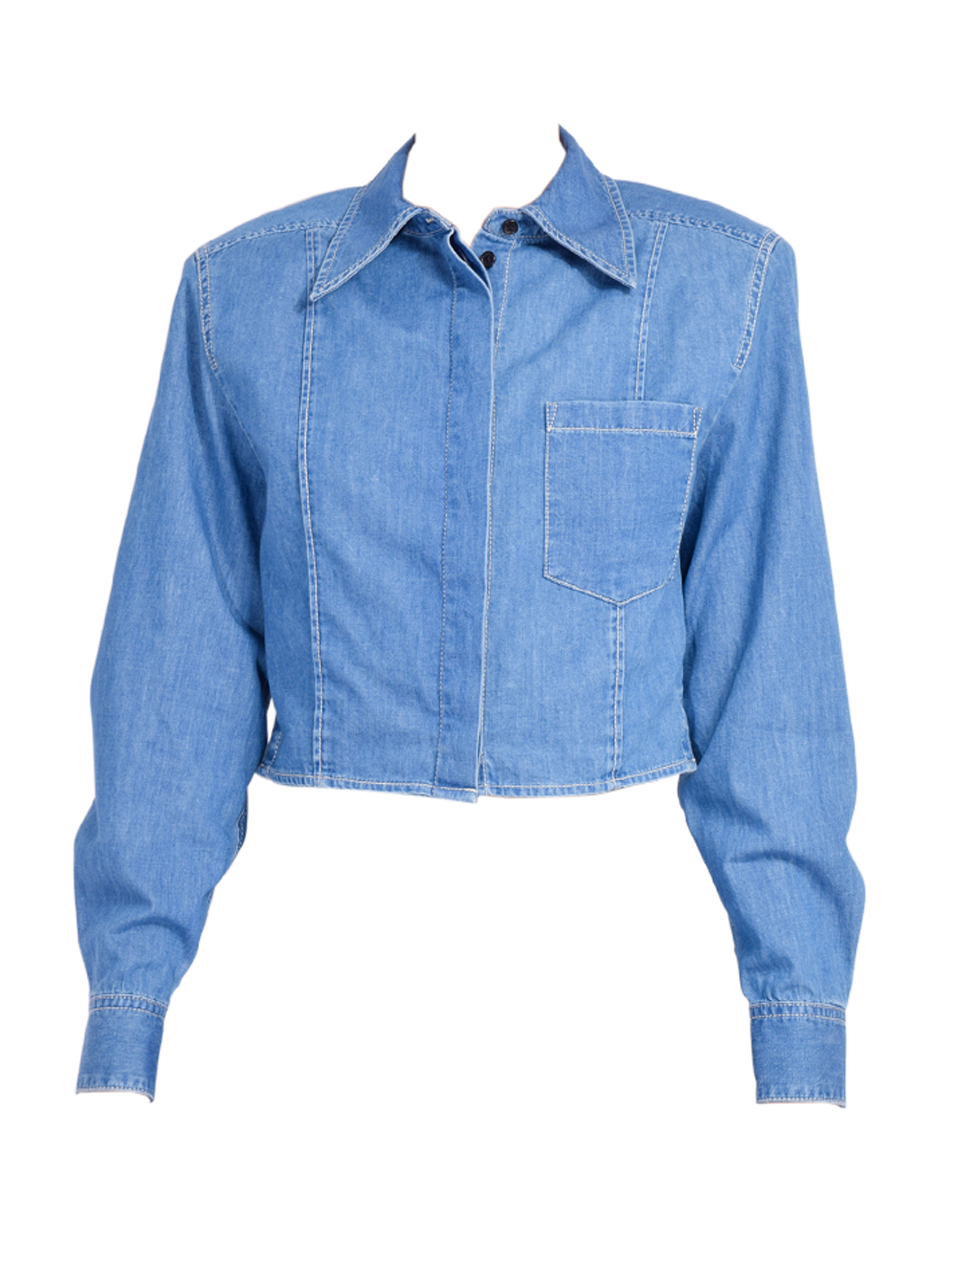 3.1 Phillip Lim Chambray Cropped Shirt with Shoulder Pads in Indigo Product Shot 